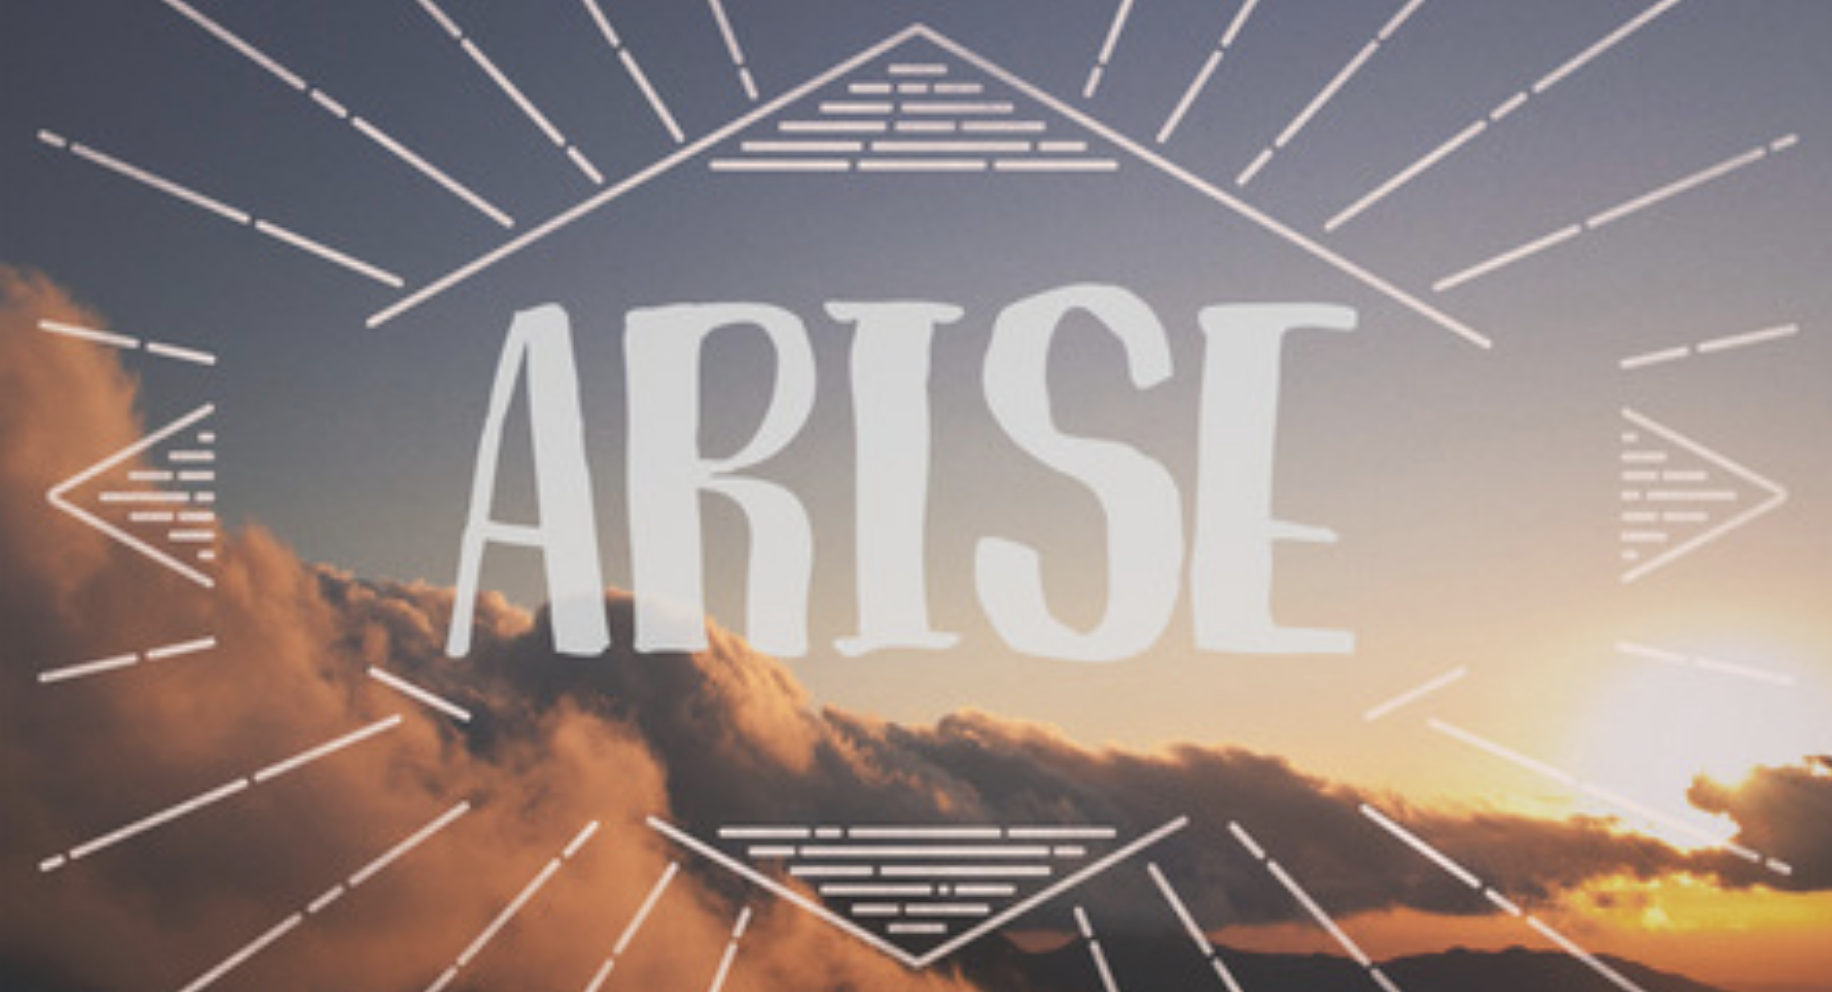 Arise Pt. 3: The Great Commission